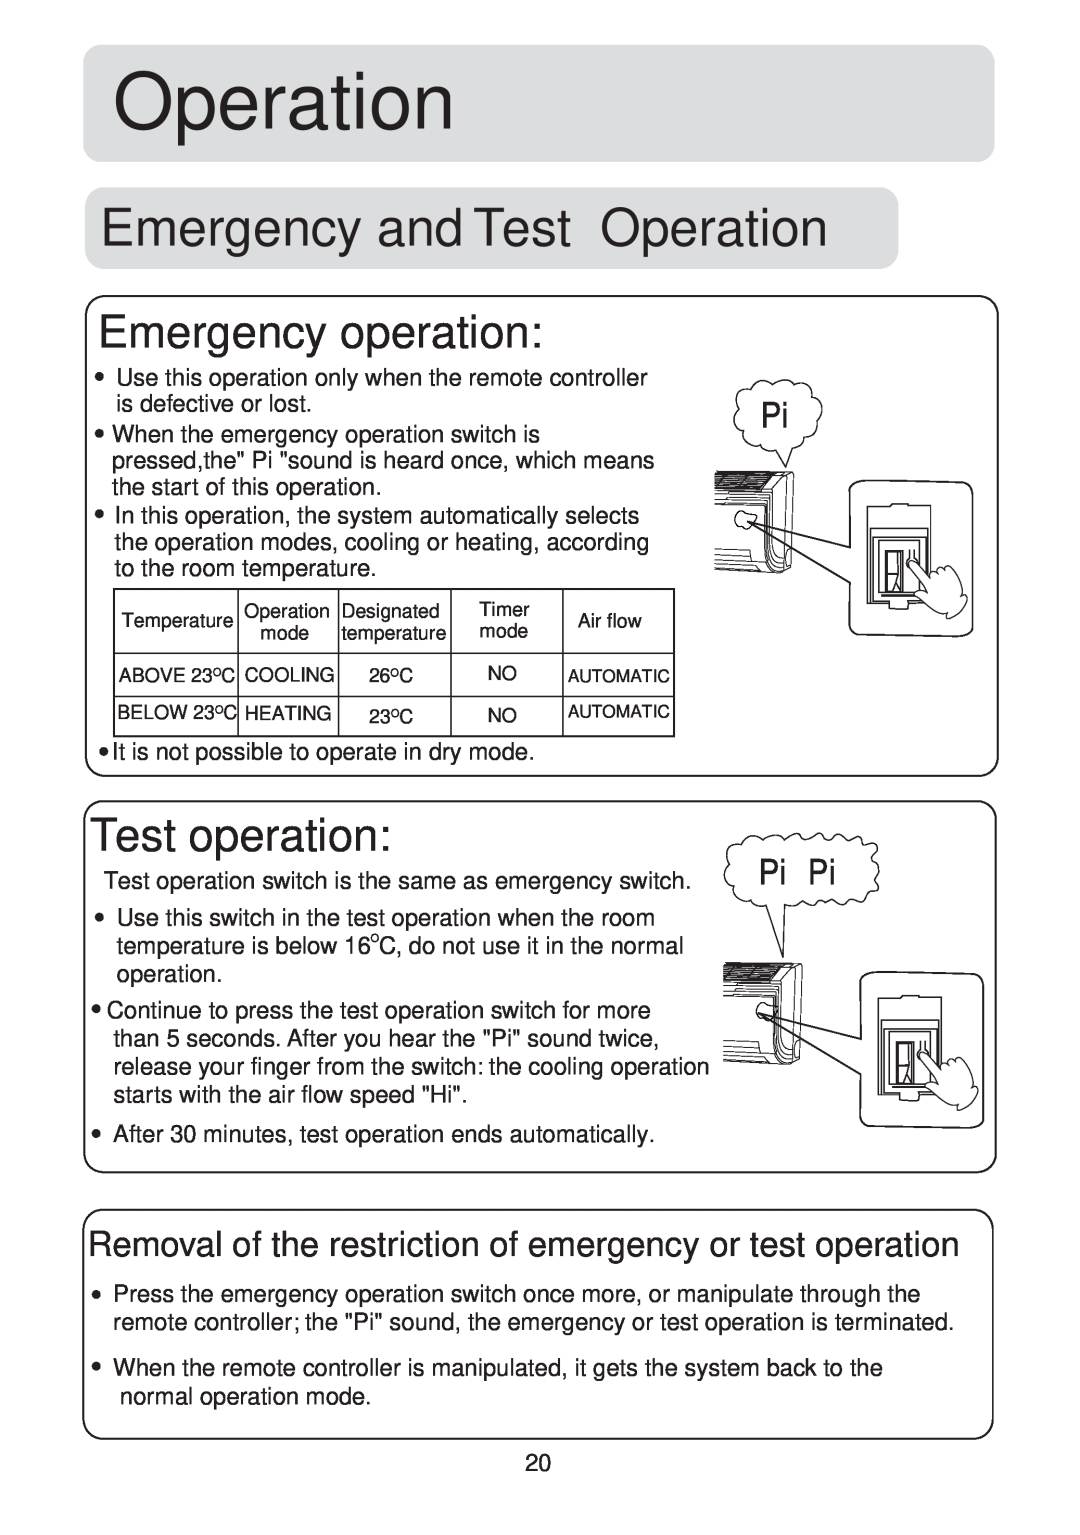 Haier HSU-07HV03, HSU-09HV03, HSU-12HV03, HSU-18HV03, HSU-22HV03, HSU-12HVB03 Emergency and Test Operation, Test operation 